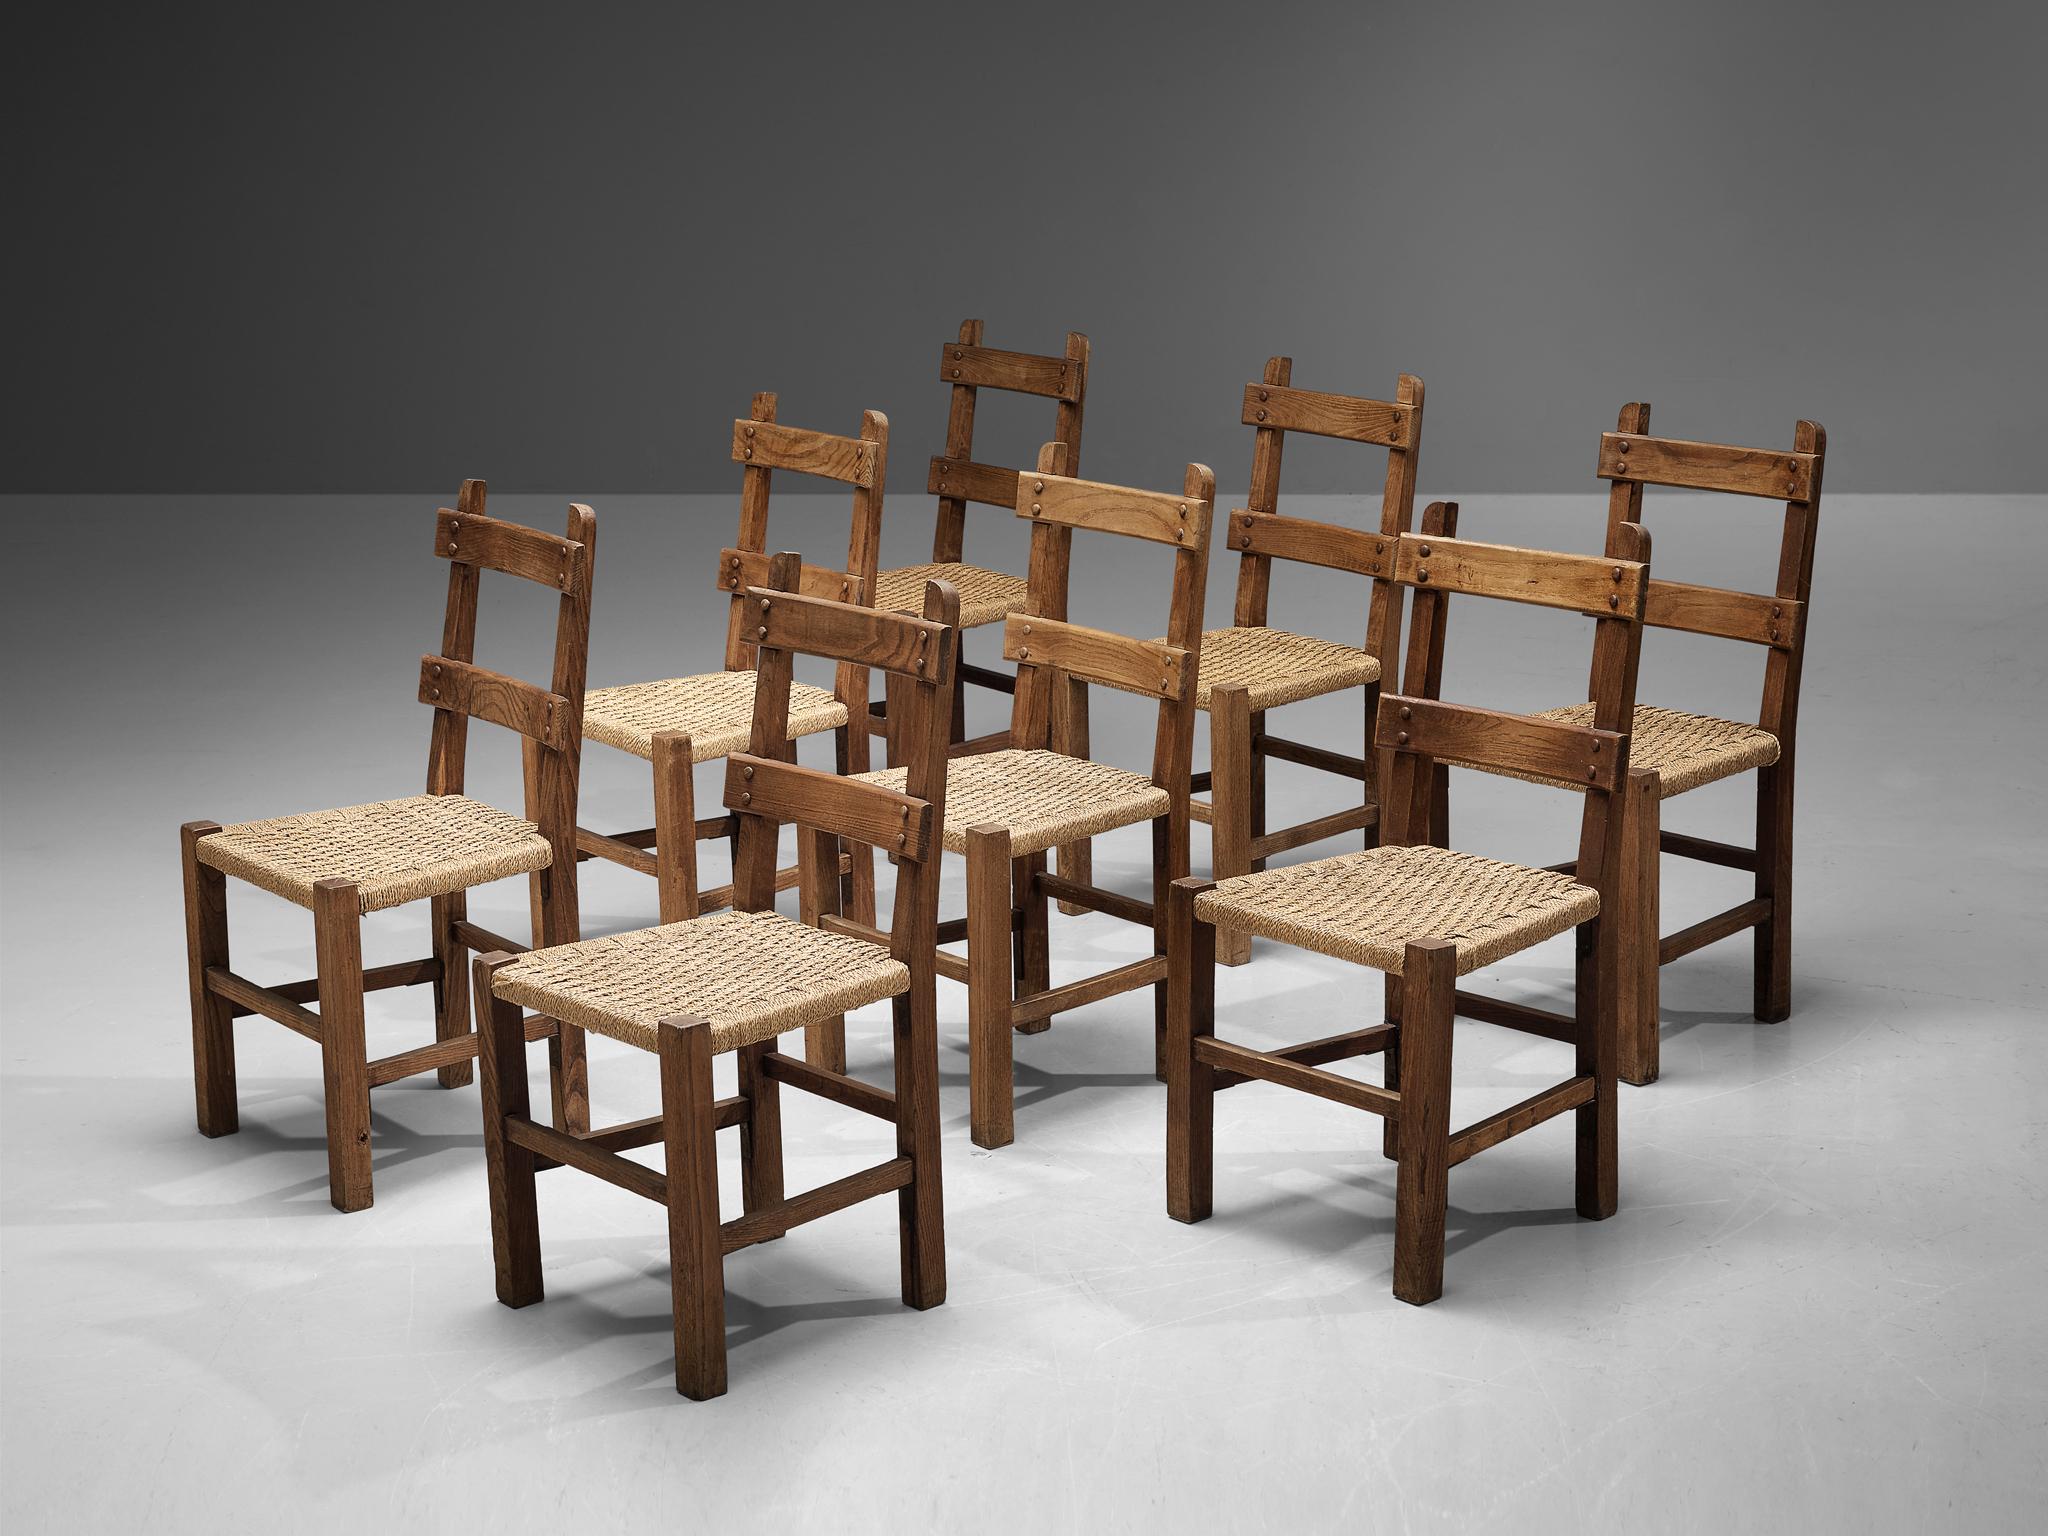 Set of eight dining chairs, rope, oak, France, 1960s

This beautiful set of provincial French dining chairs conceal an evolved rustic character with great quality of elegance. This is discernible in the wooden frame which is based on a